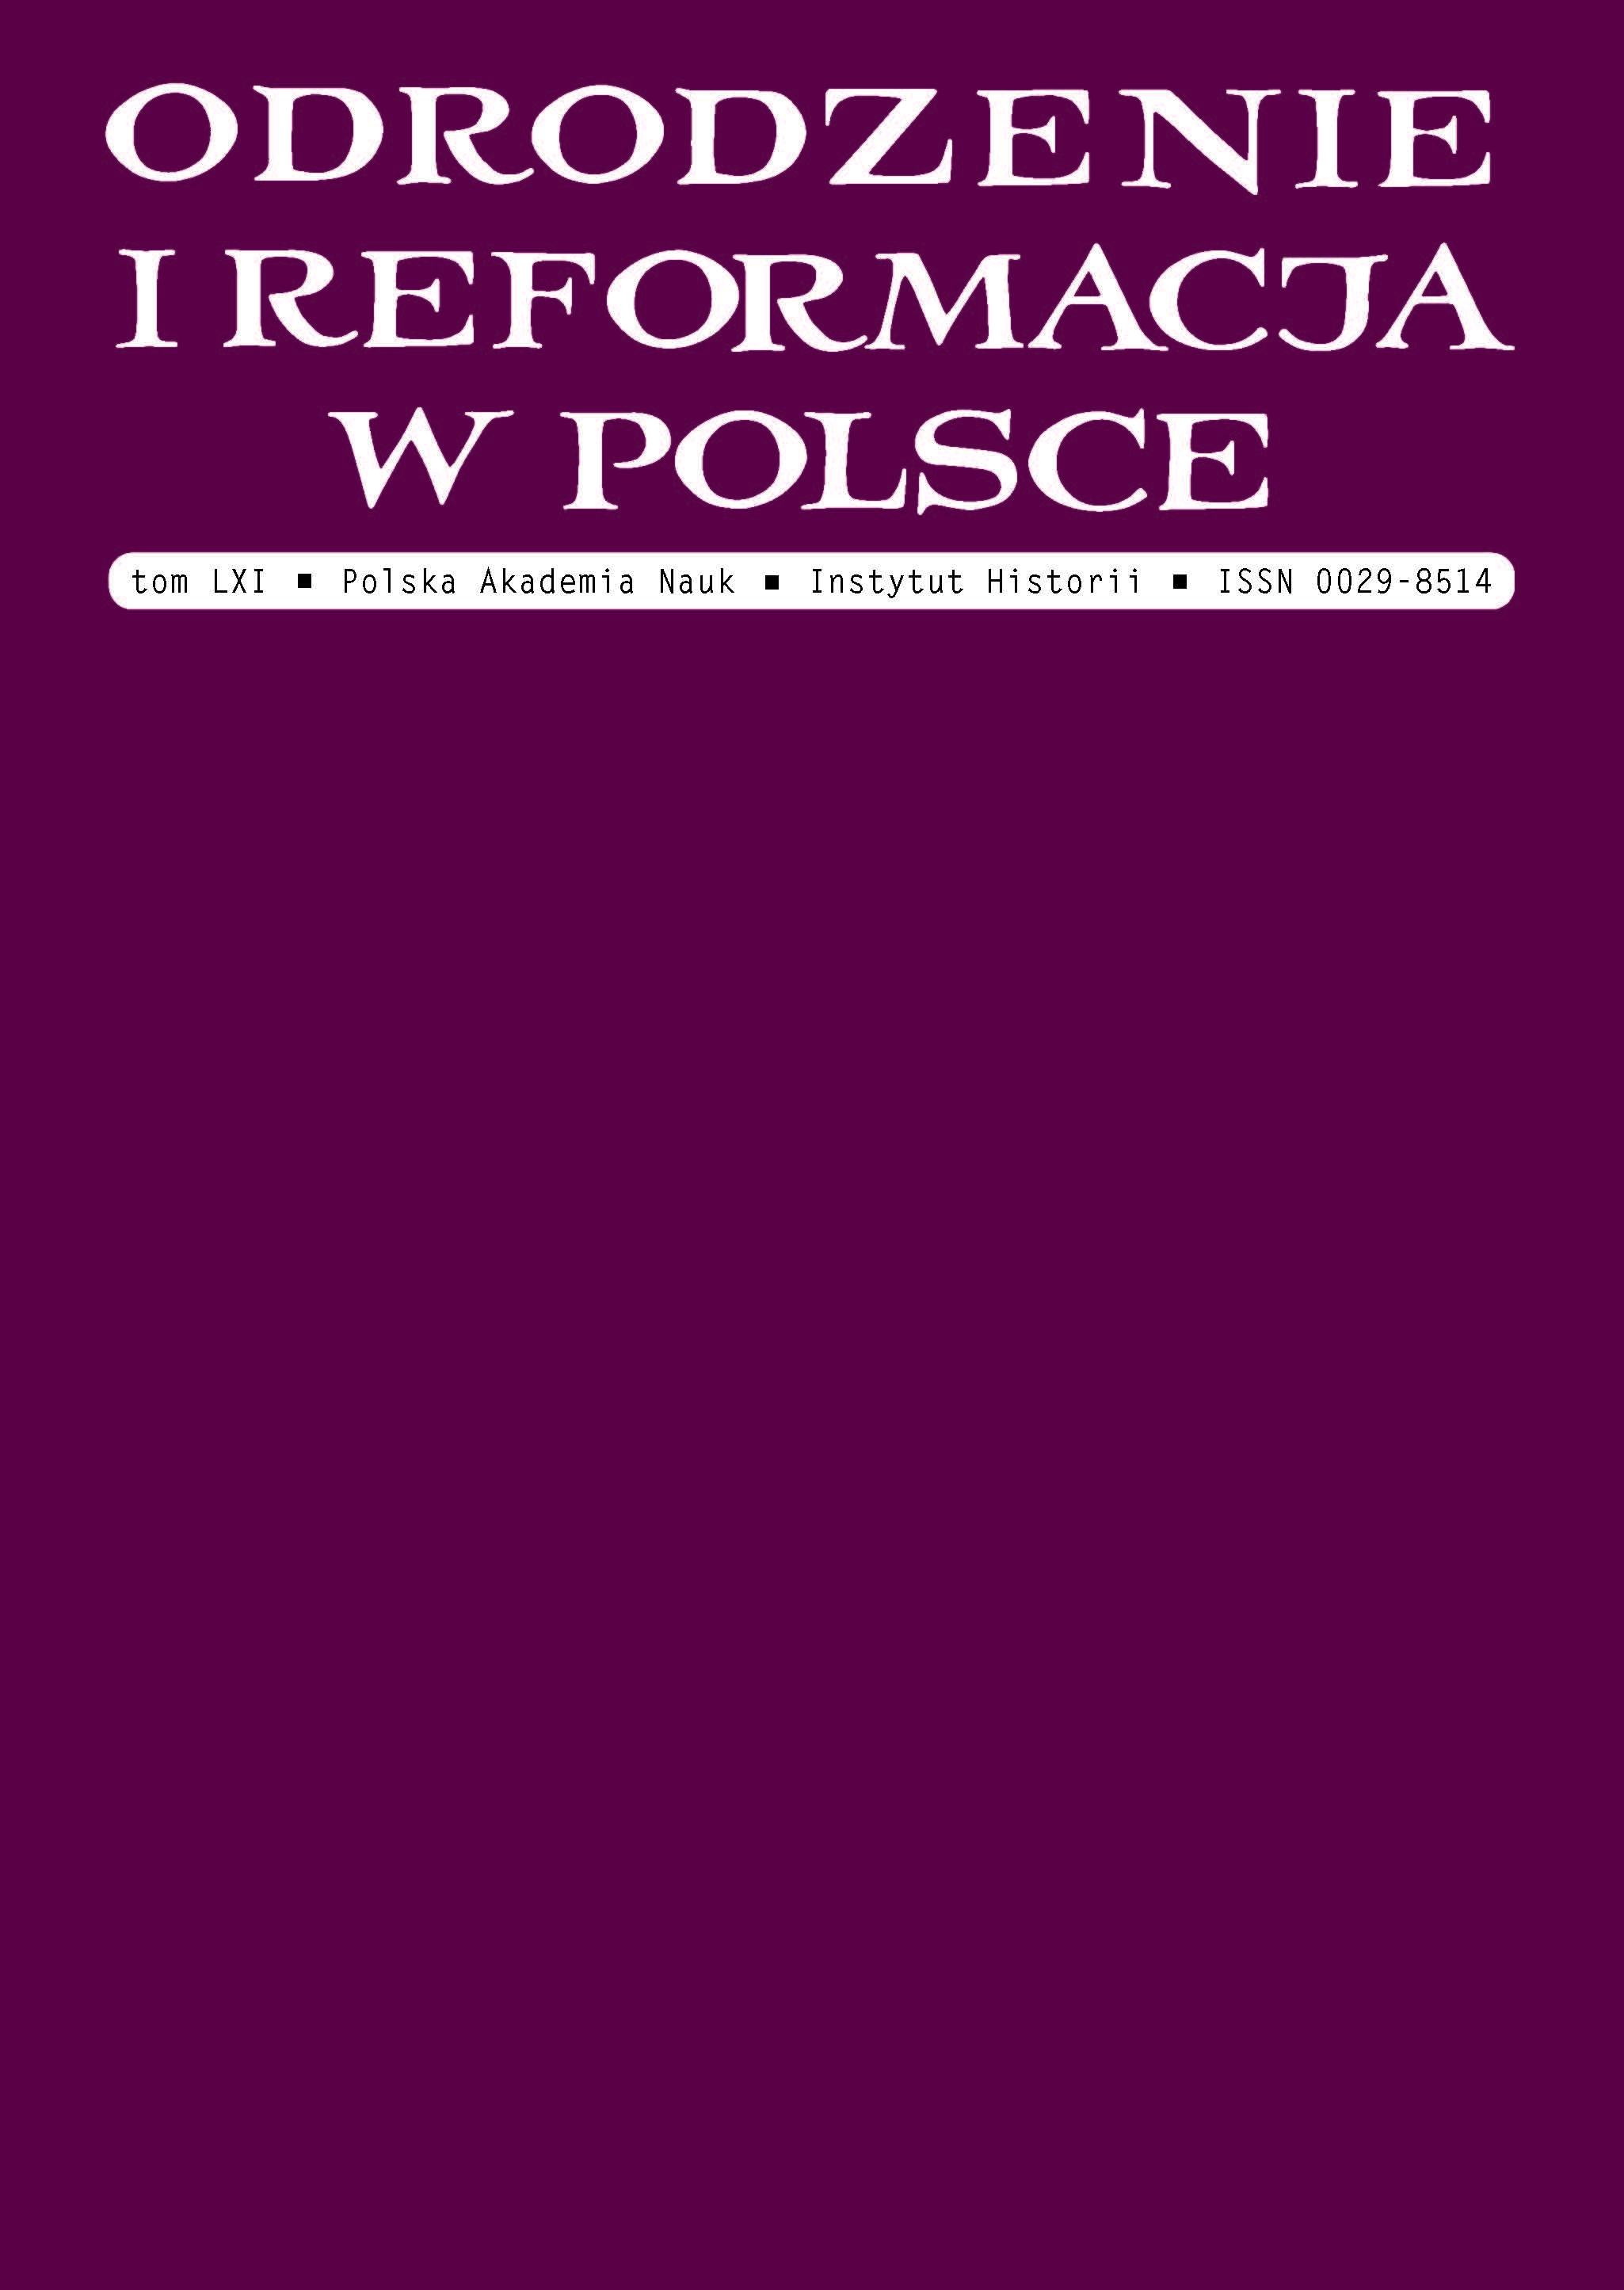 Renaissance and Reformation in Poland